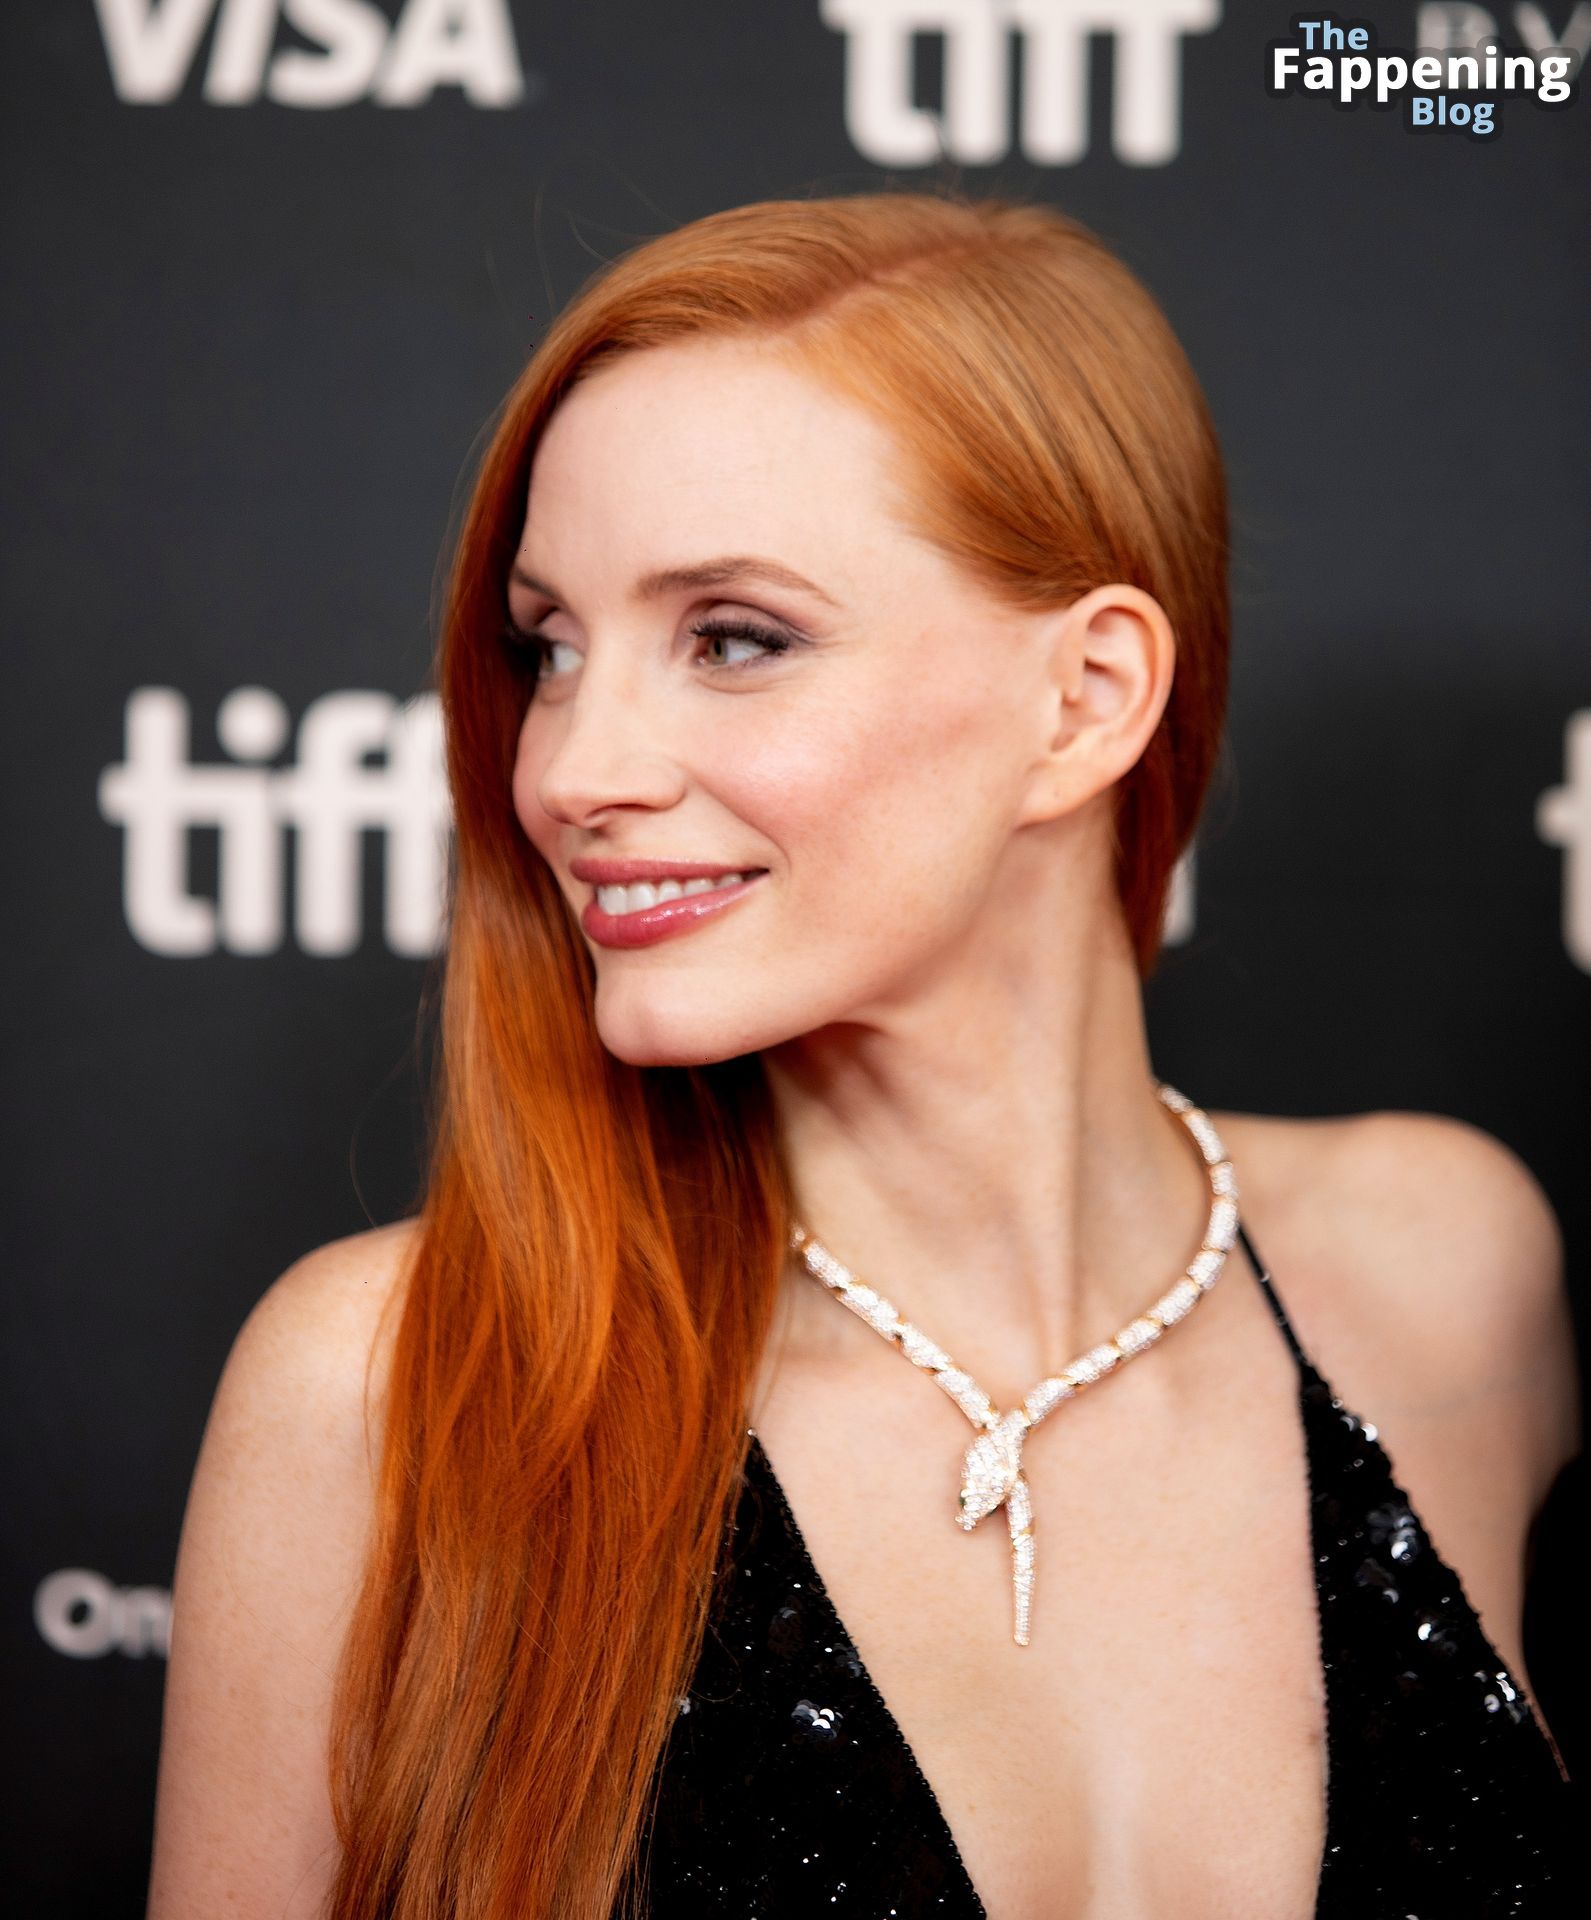 Jessica-Chastain-Sexy-54-The-Fappening-Blog.jpg